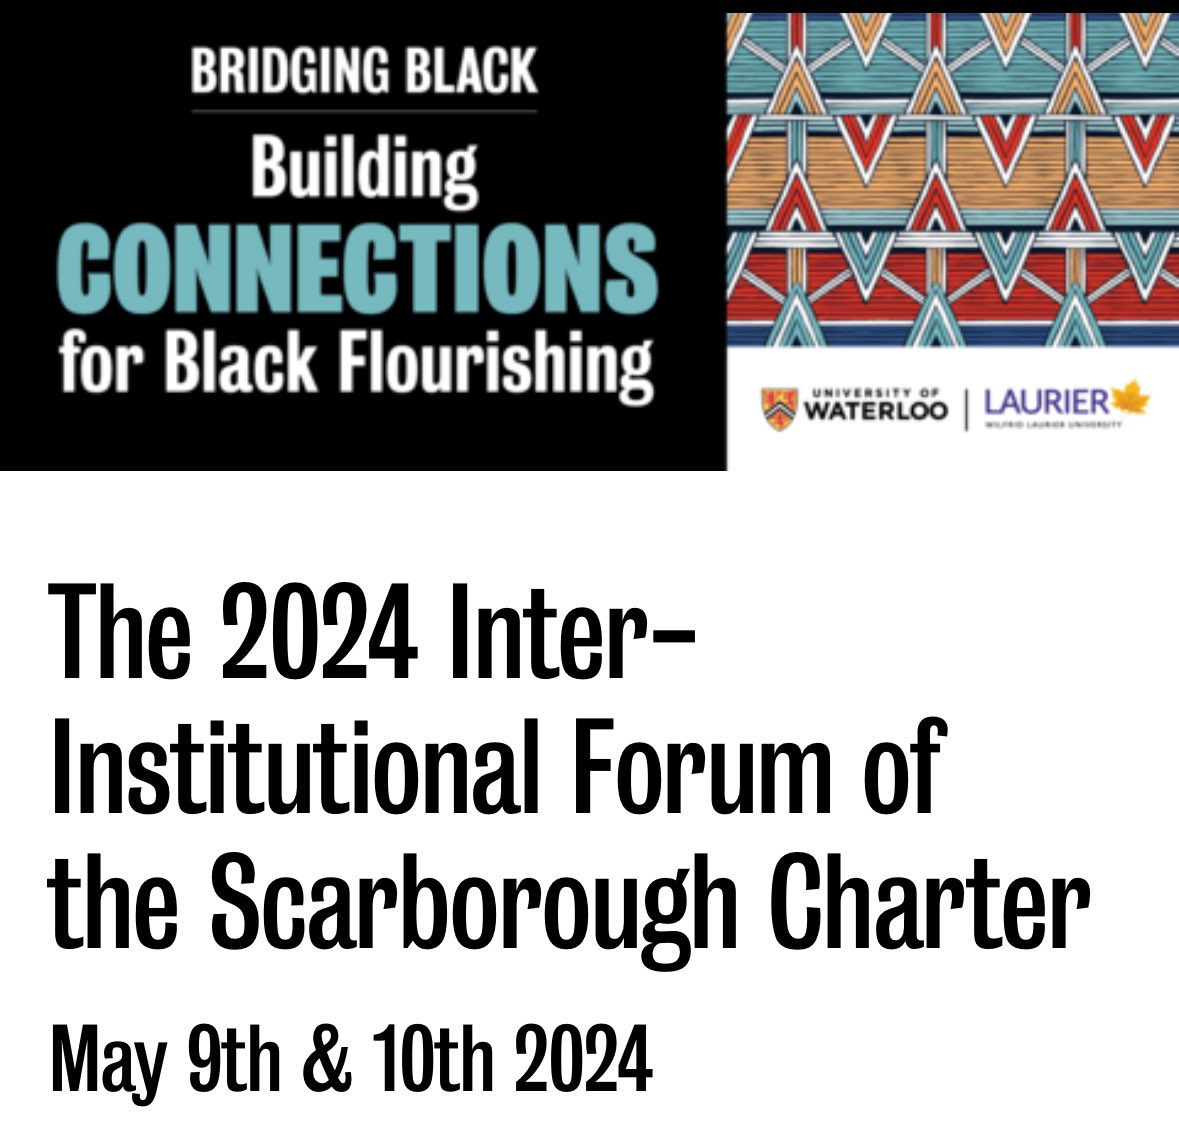 Great to be representing the @UCalgary at the 2nd Inter-Institutional Forum of the Scarborough Charter on Anti-Black Racism and Black Inclusion hosted by @UWaterloo & @Laurier. Looking forward to “Bridging Black, Building Connections for Black Flourishing”uwaterloo.ca/inter-institut…